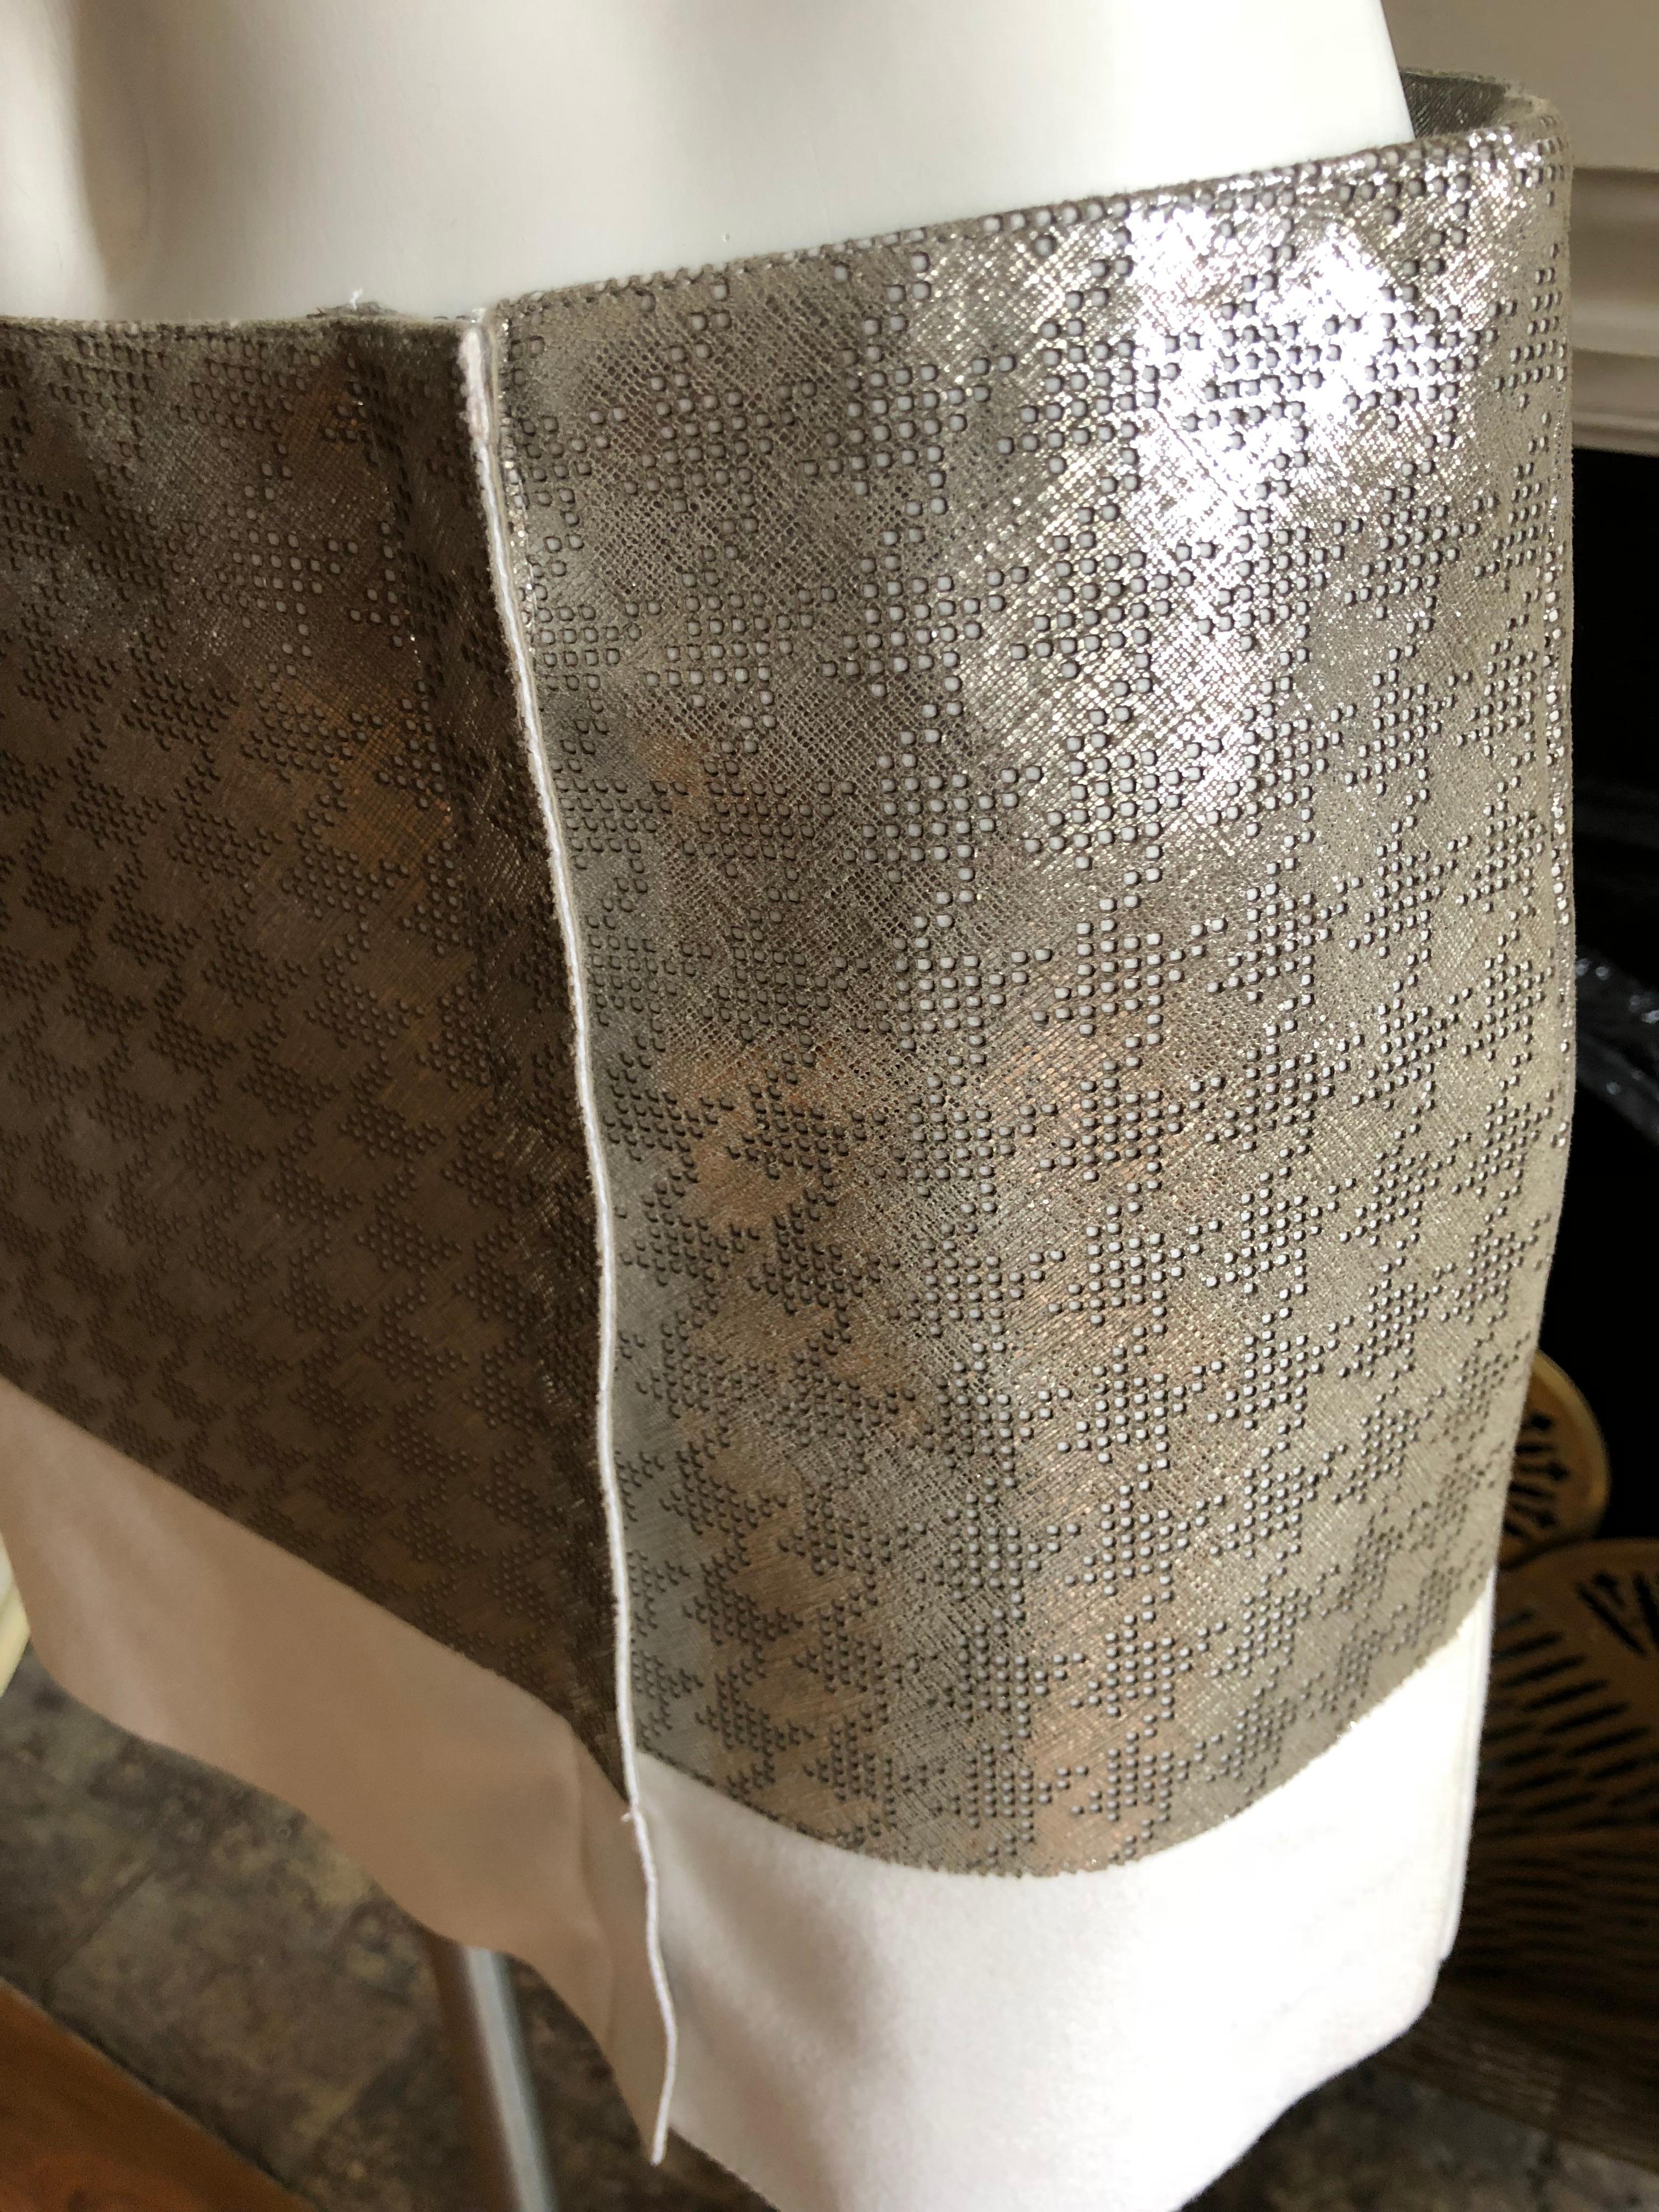 Wonderful patterned leather which looks like a braille in silver metallic leather with a white felt wool hem. The waist measurement is 31